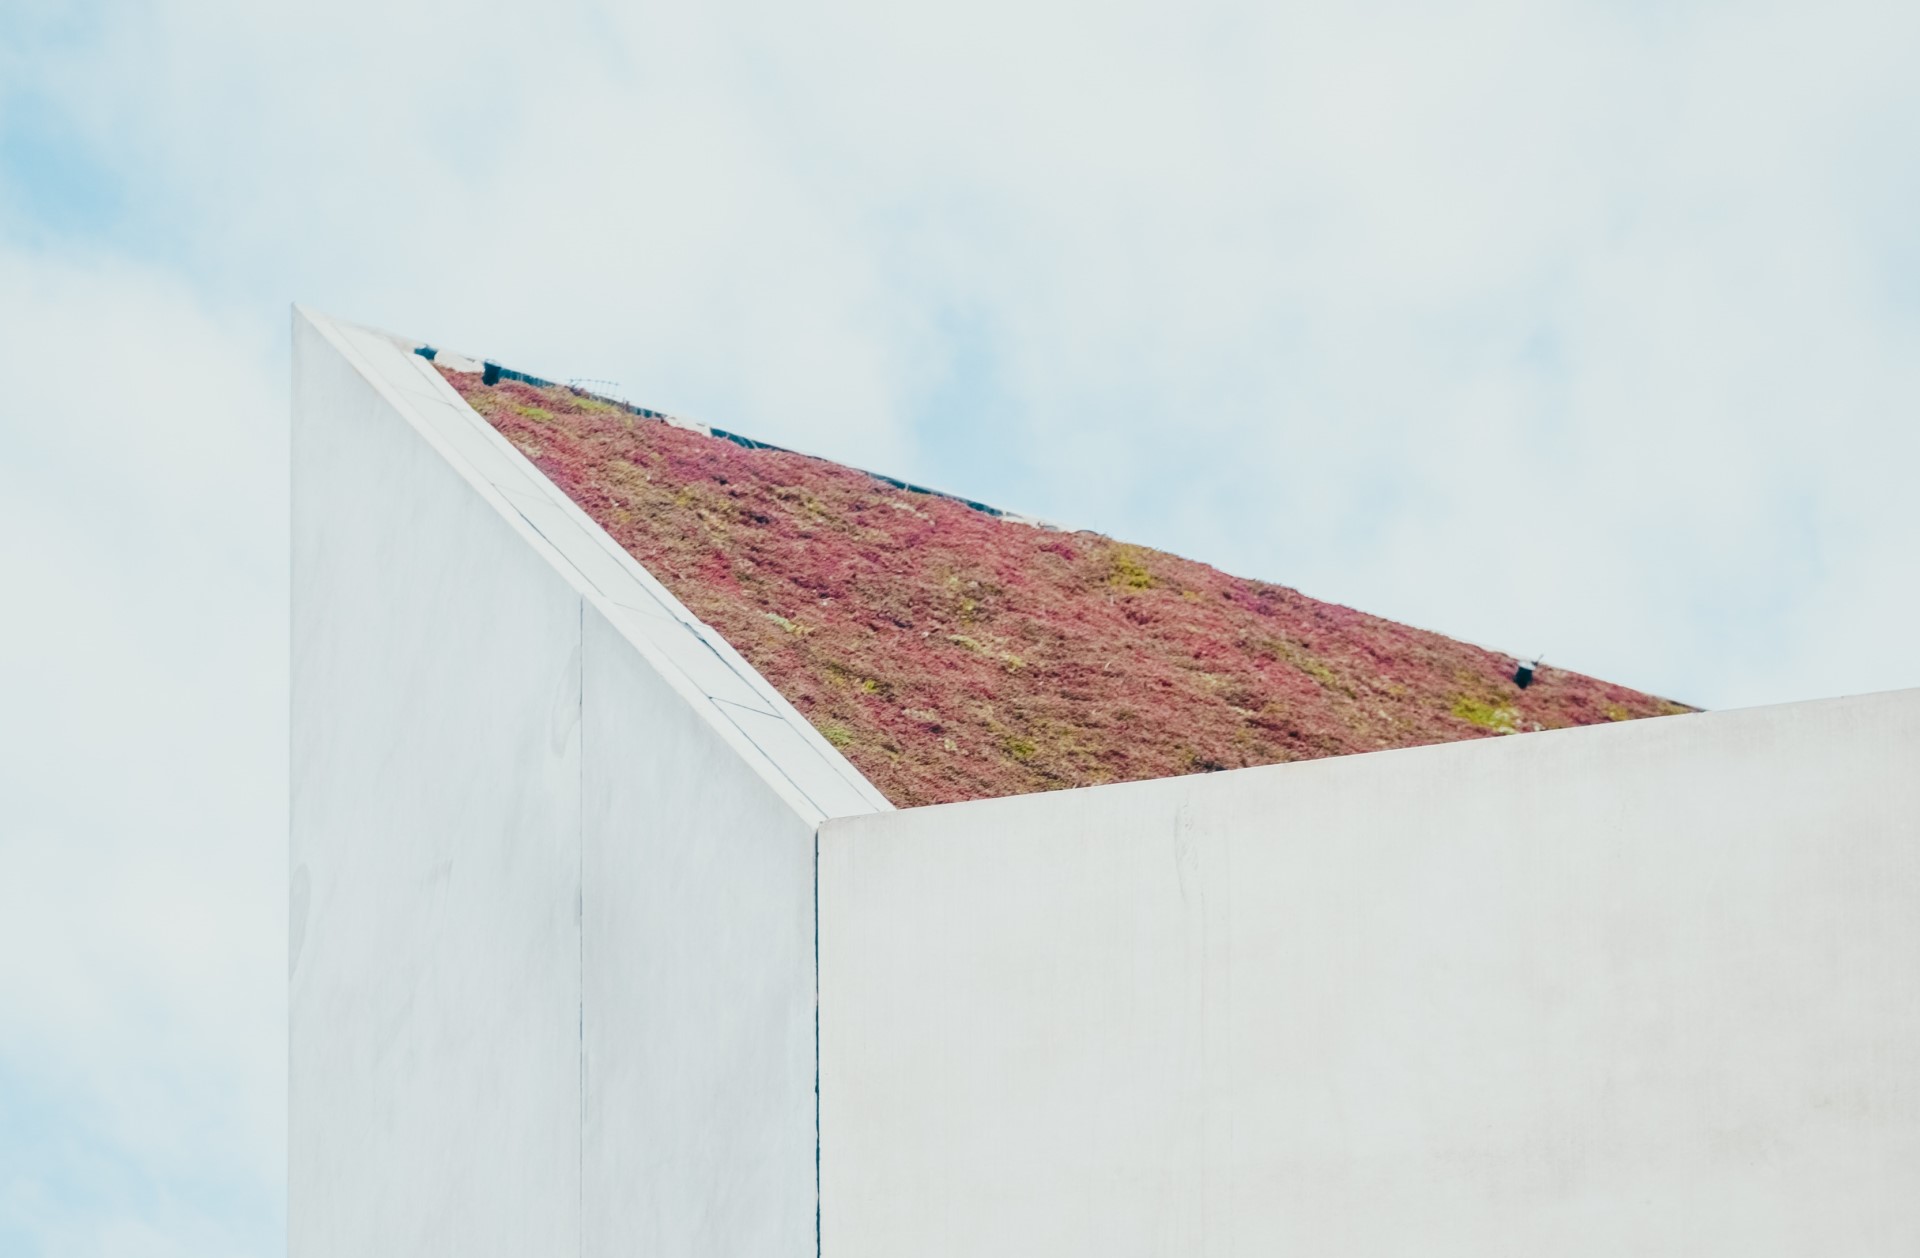 3 Financial Benefits of Maintaining a Green Roof | If you fail to maintain your green roof, you can’t hope to reap the promised financial benefits.